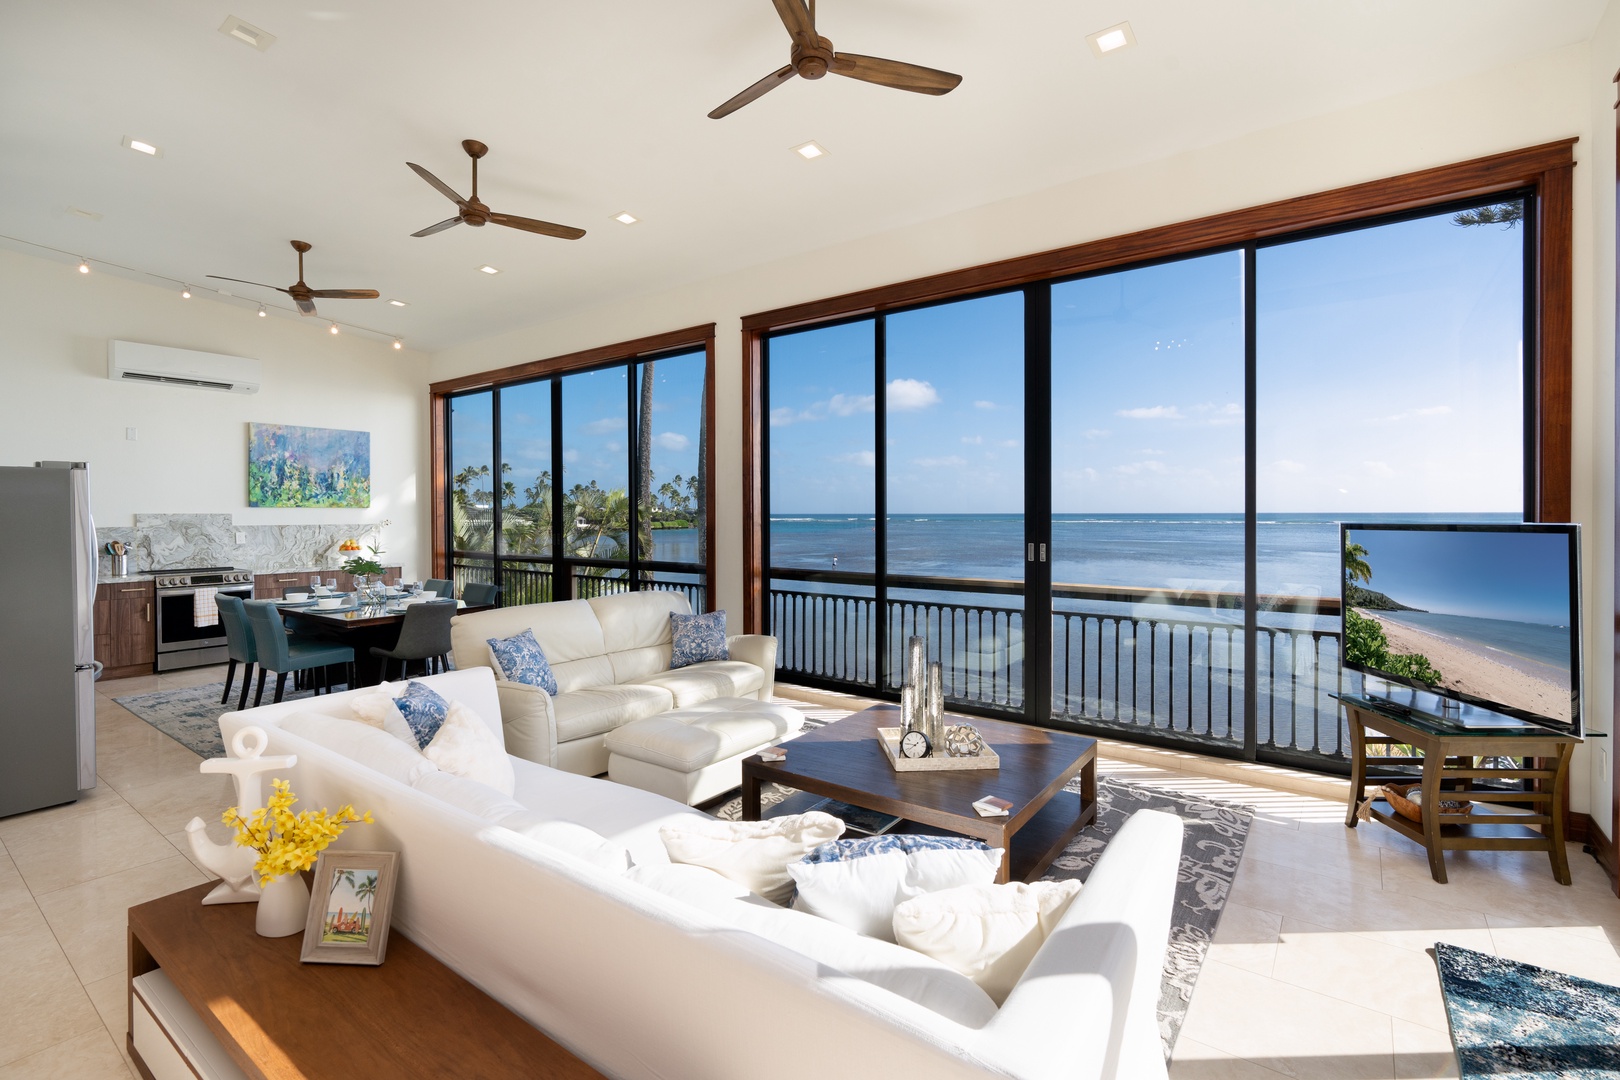 Honolulu Vacation Rentals, Wailupe Seaside - Wall to wall windows with never ending ocean views.